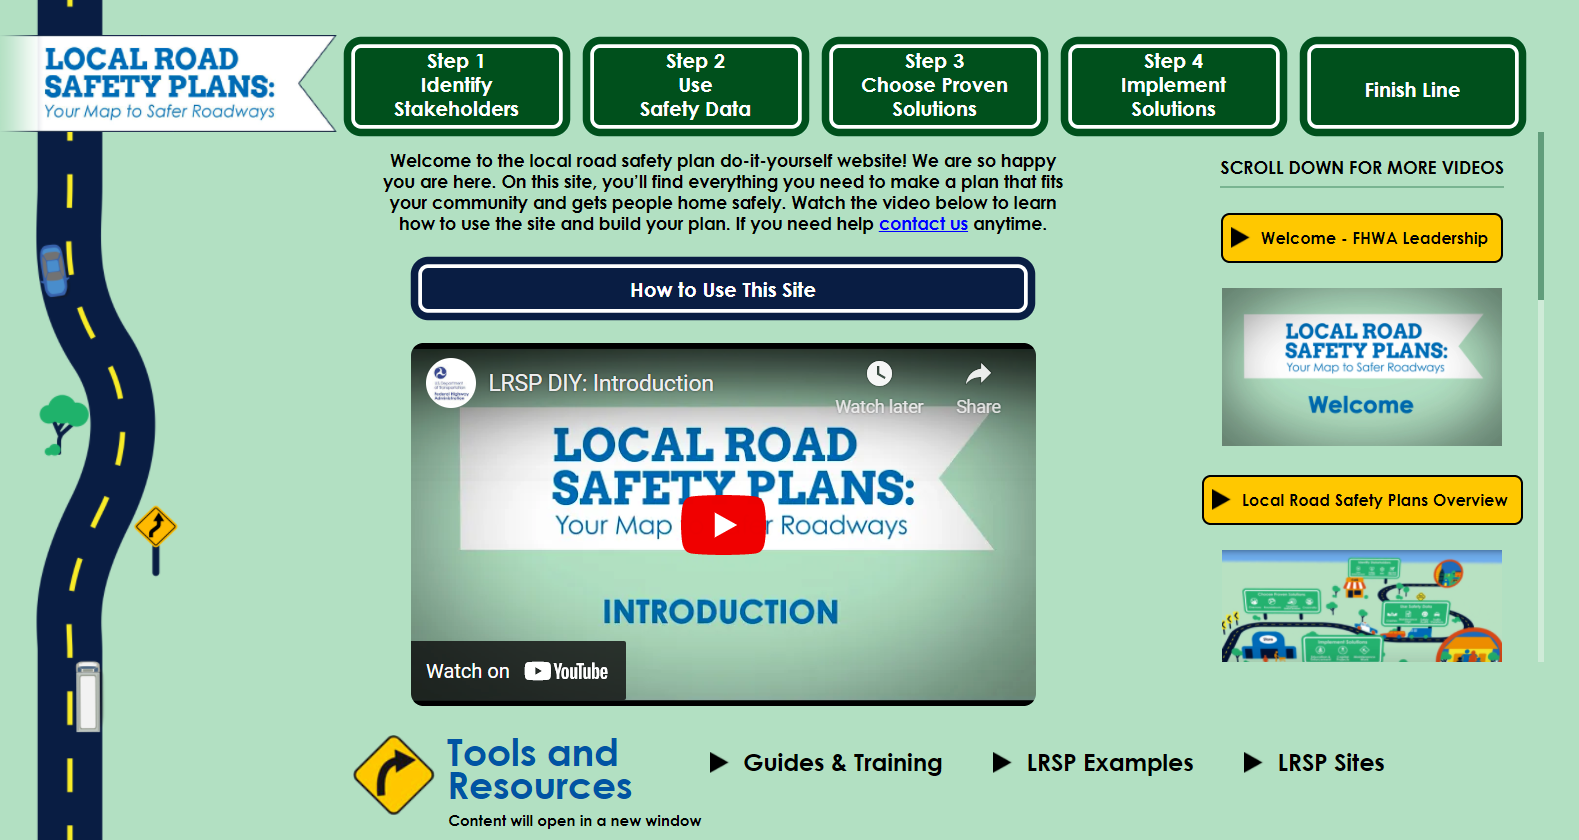 FHWA Local Road Safety Plan website screenshot and video link.